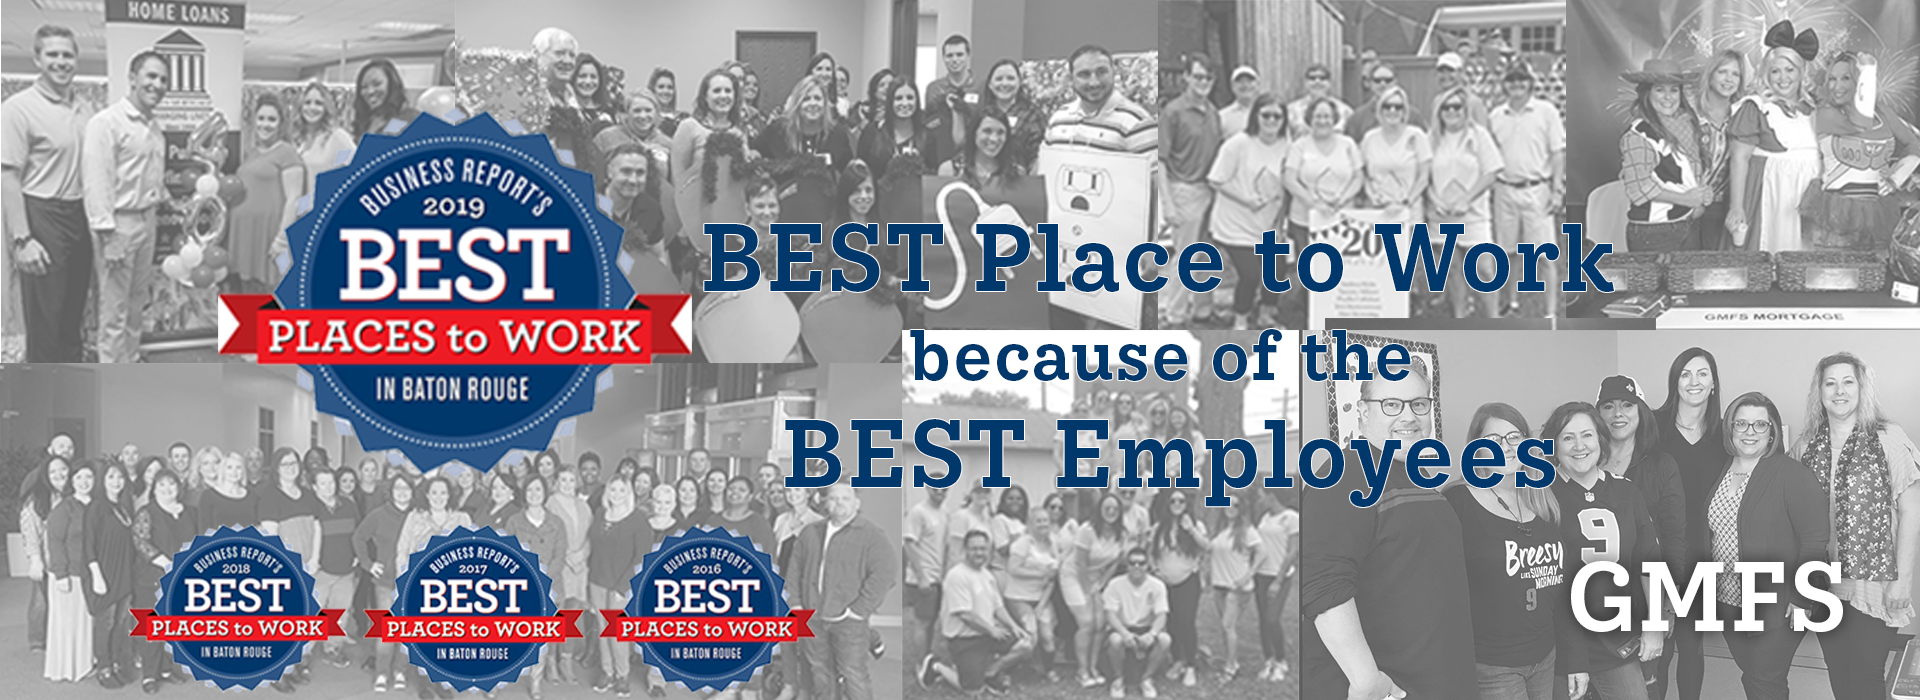 GMFS Mortgage Careers - Voted Best Places to Work - Rated 5 Stars